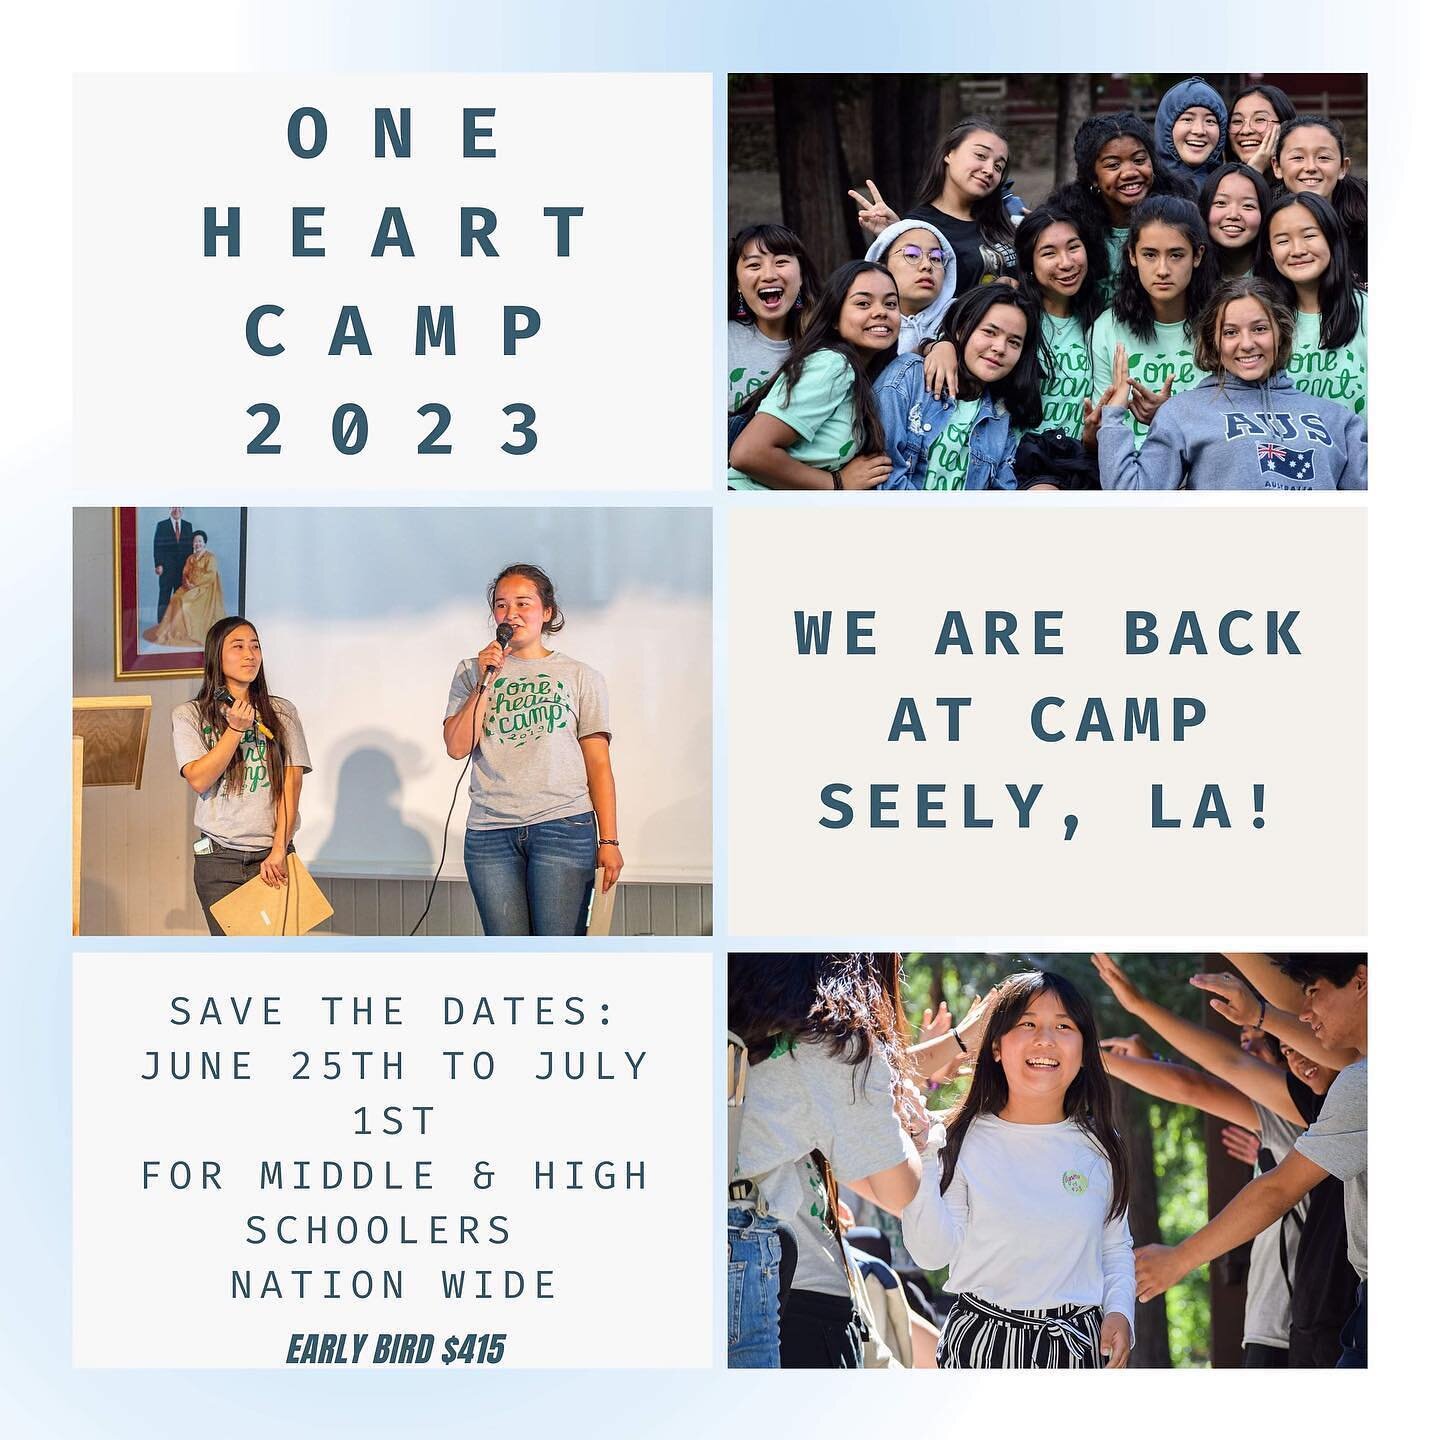 Summer Camp season is around the corner y&rsquo;all☀️
⠀⠀⠀⠀⠀⠀⠀⠀⠀
One Heart Camp registration is open for middle and high schooler&rsquo;s nationwide! Regular price is $425 and the deadline to register is June 11.
⠀⠀⠀⠀⠀⠀⠀⠀⠀
Use the link in our bio to r